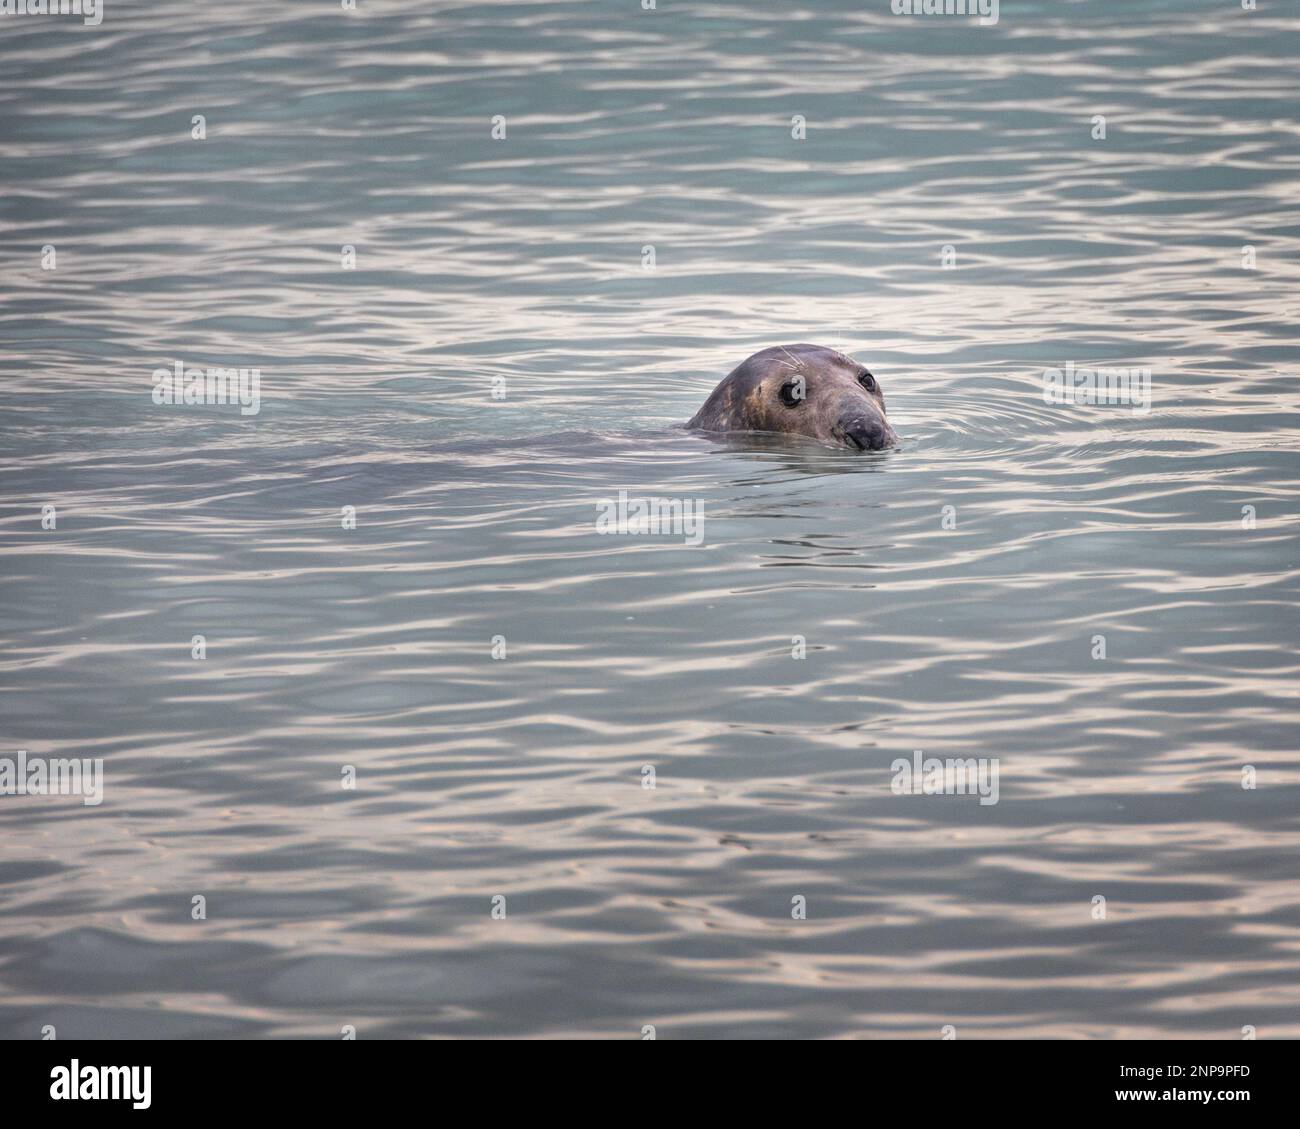 A common seal swimming off the coast at Worthing, West Sussex, UK Stock Photo